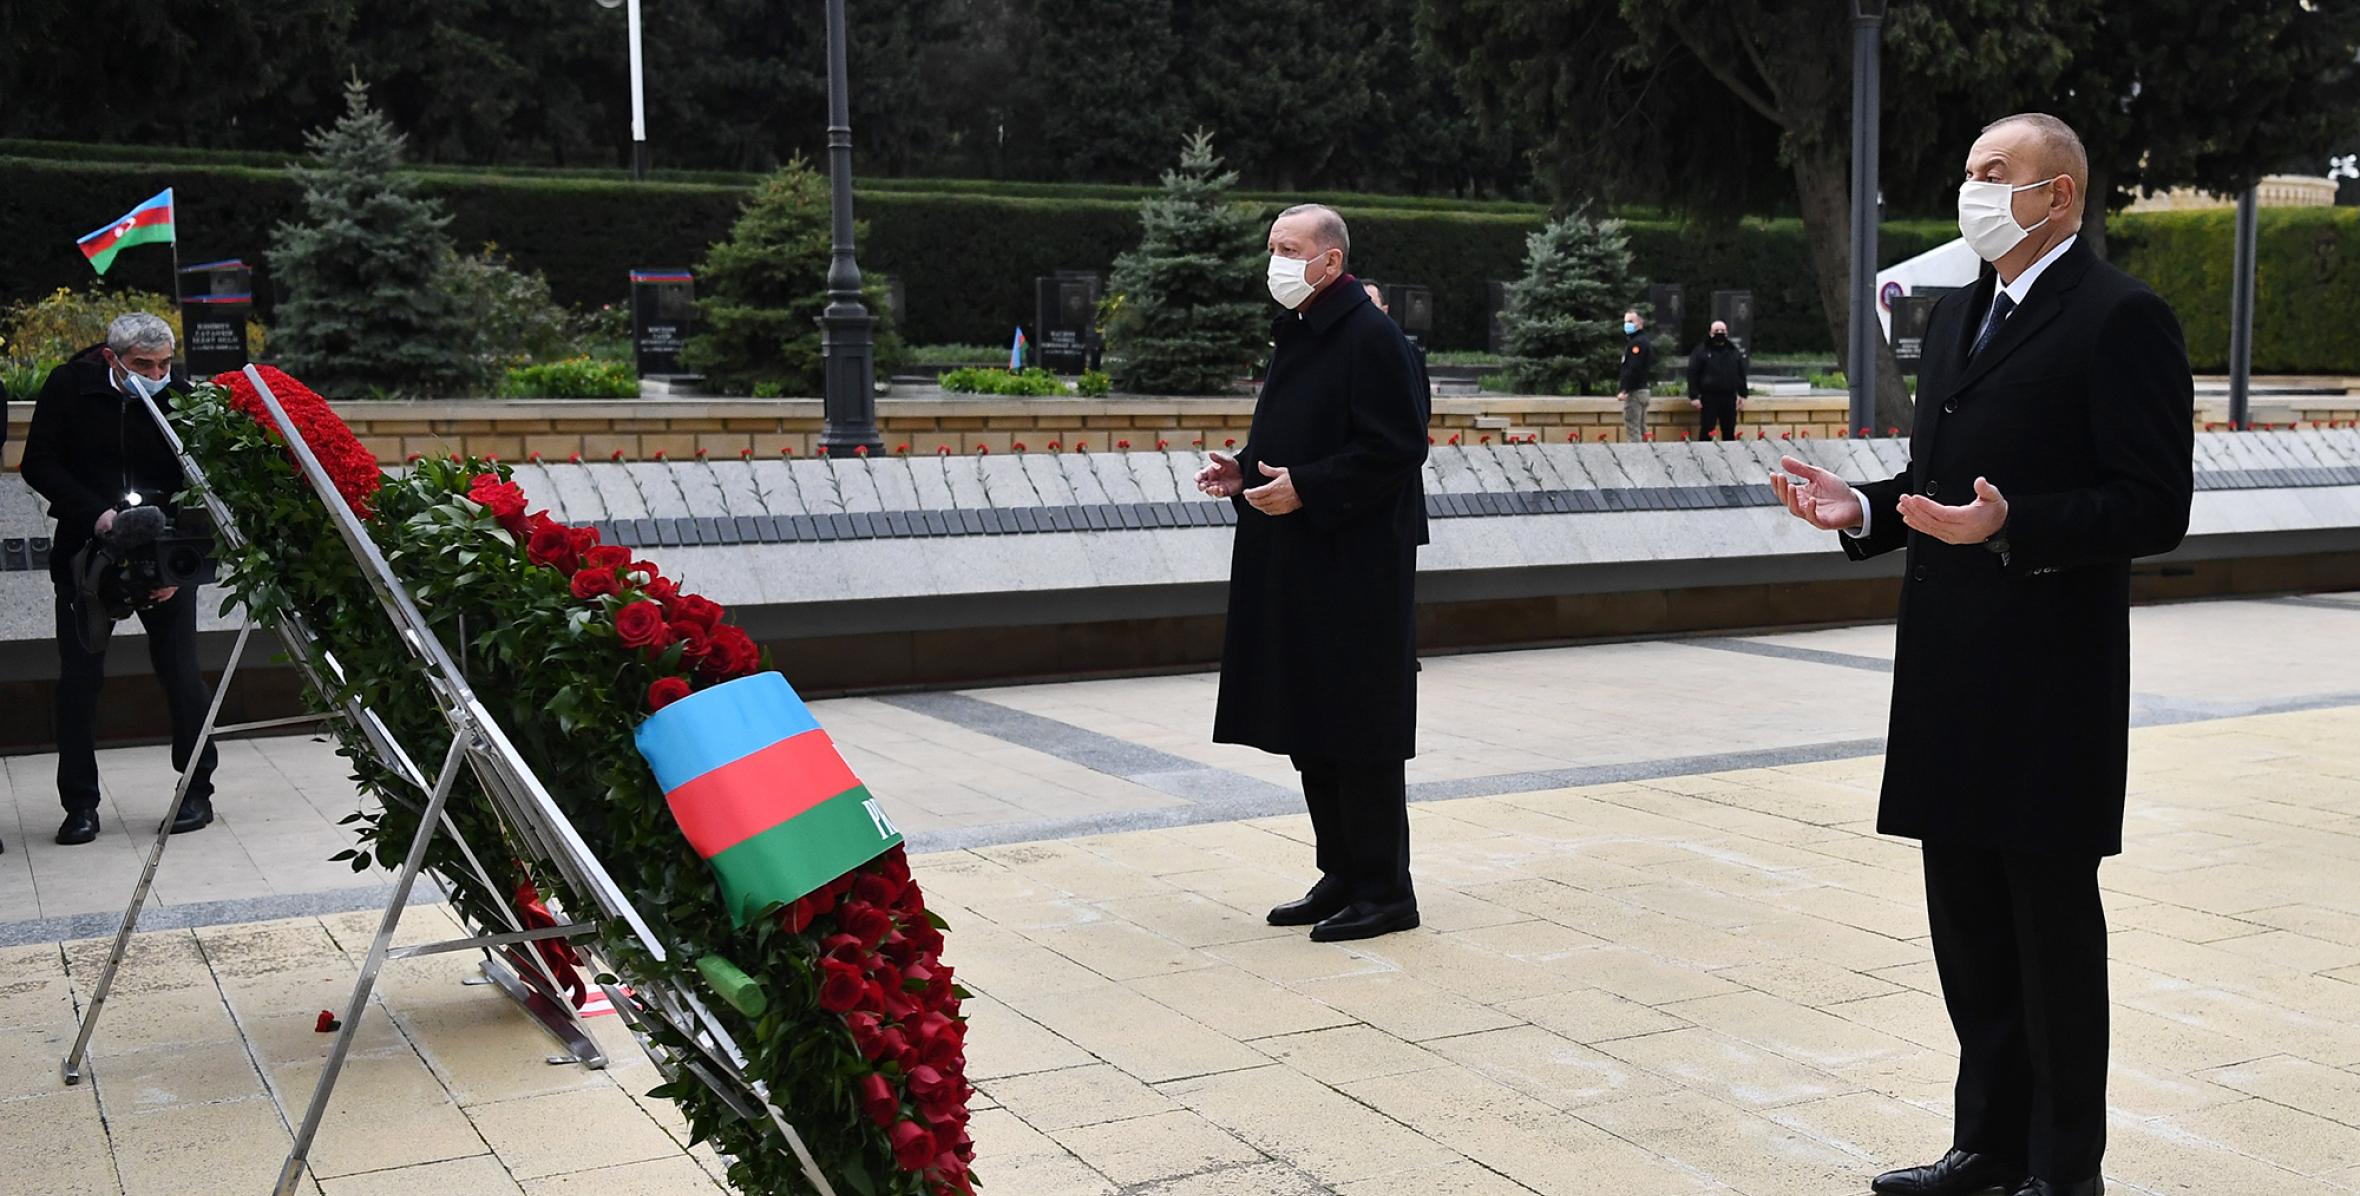 Ilham Aliyev and President of the Republic of Turkey Recep Tayyip Erdogan have visited the Alley of Martyrs.